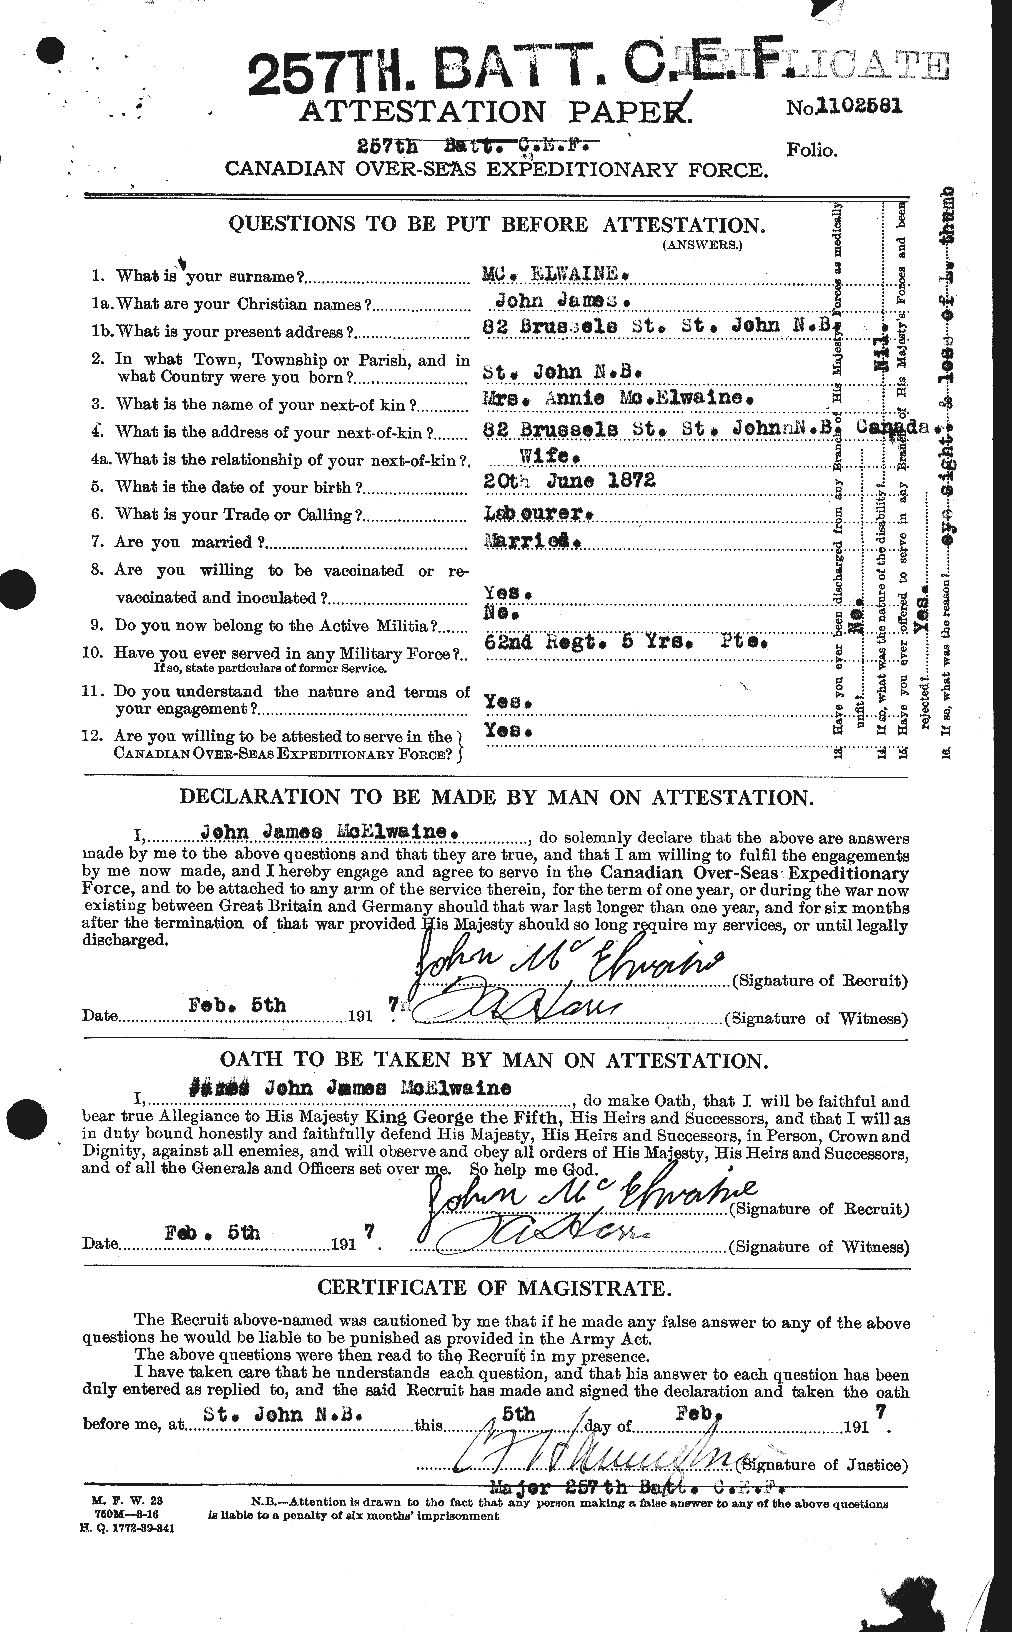 Personnel Records of the First World War - CEF 522114a